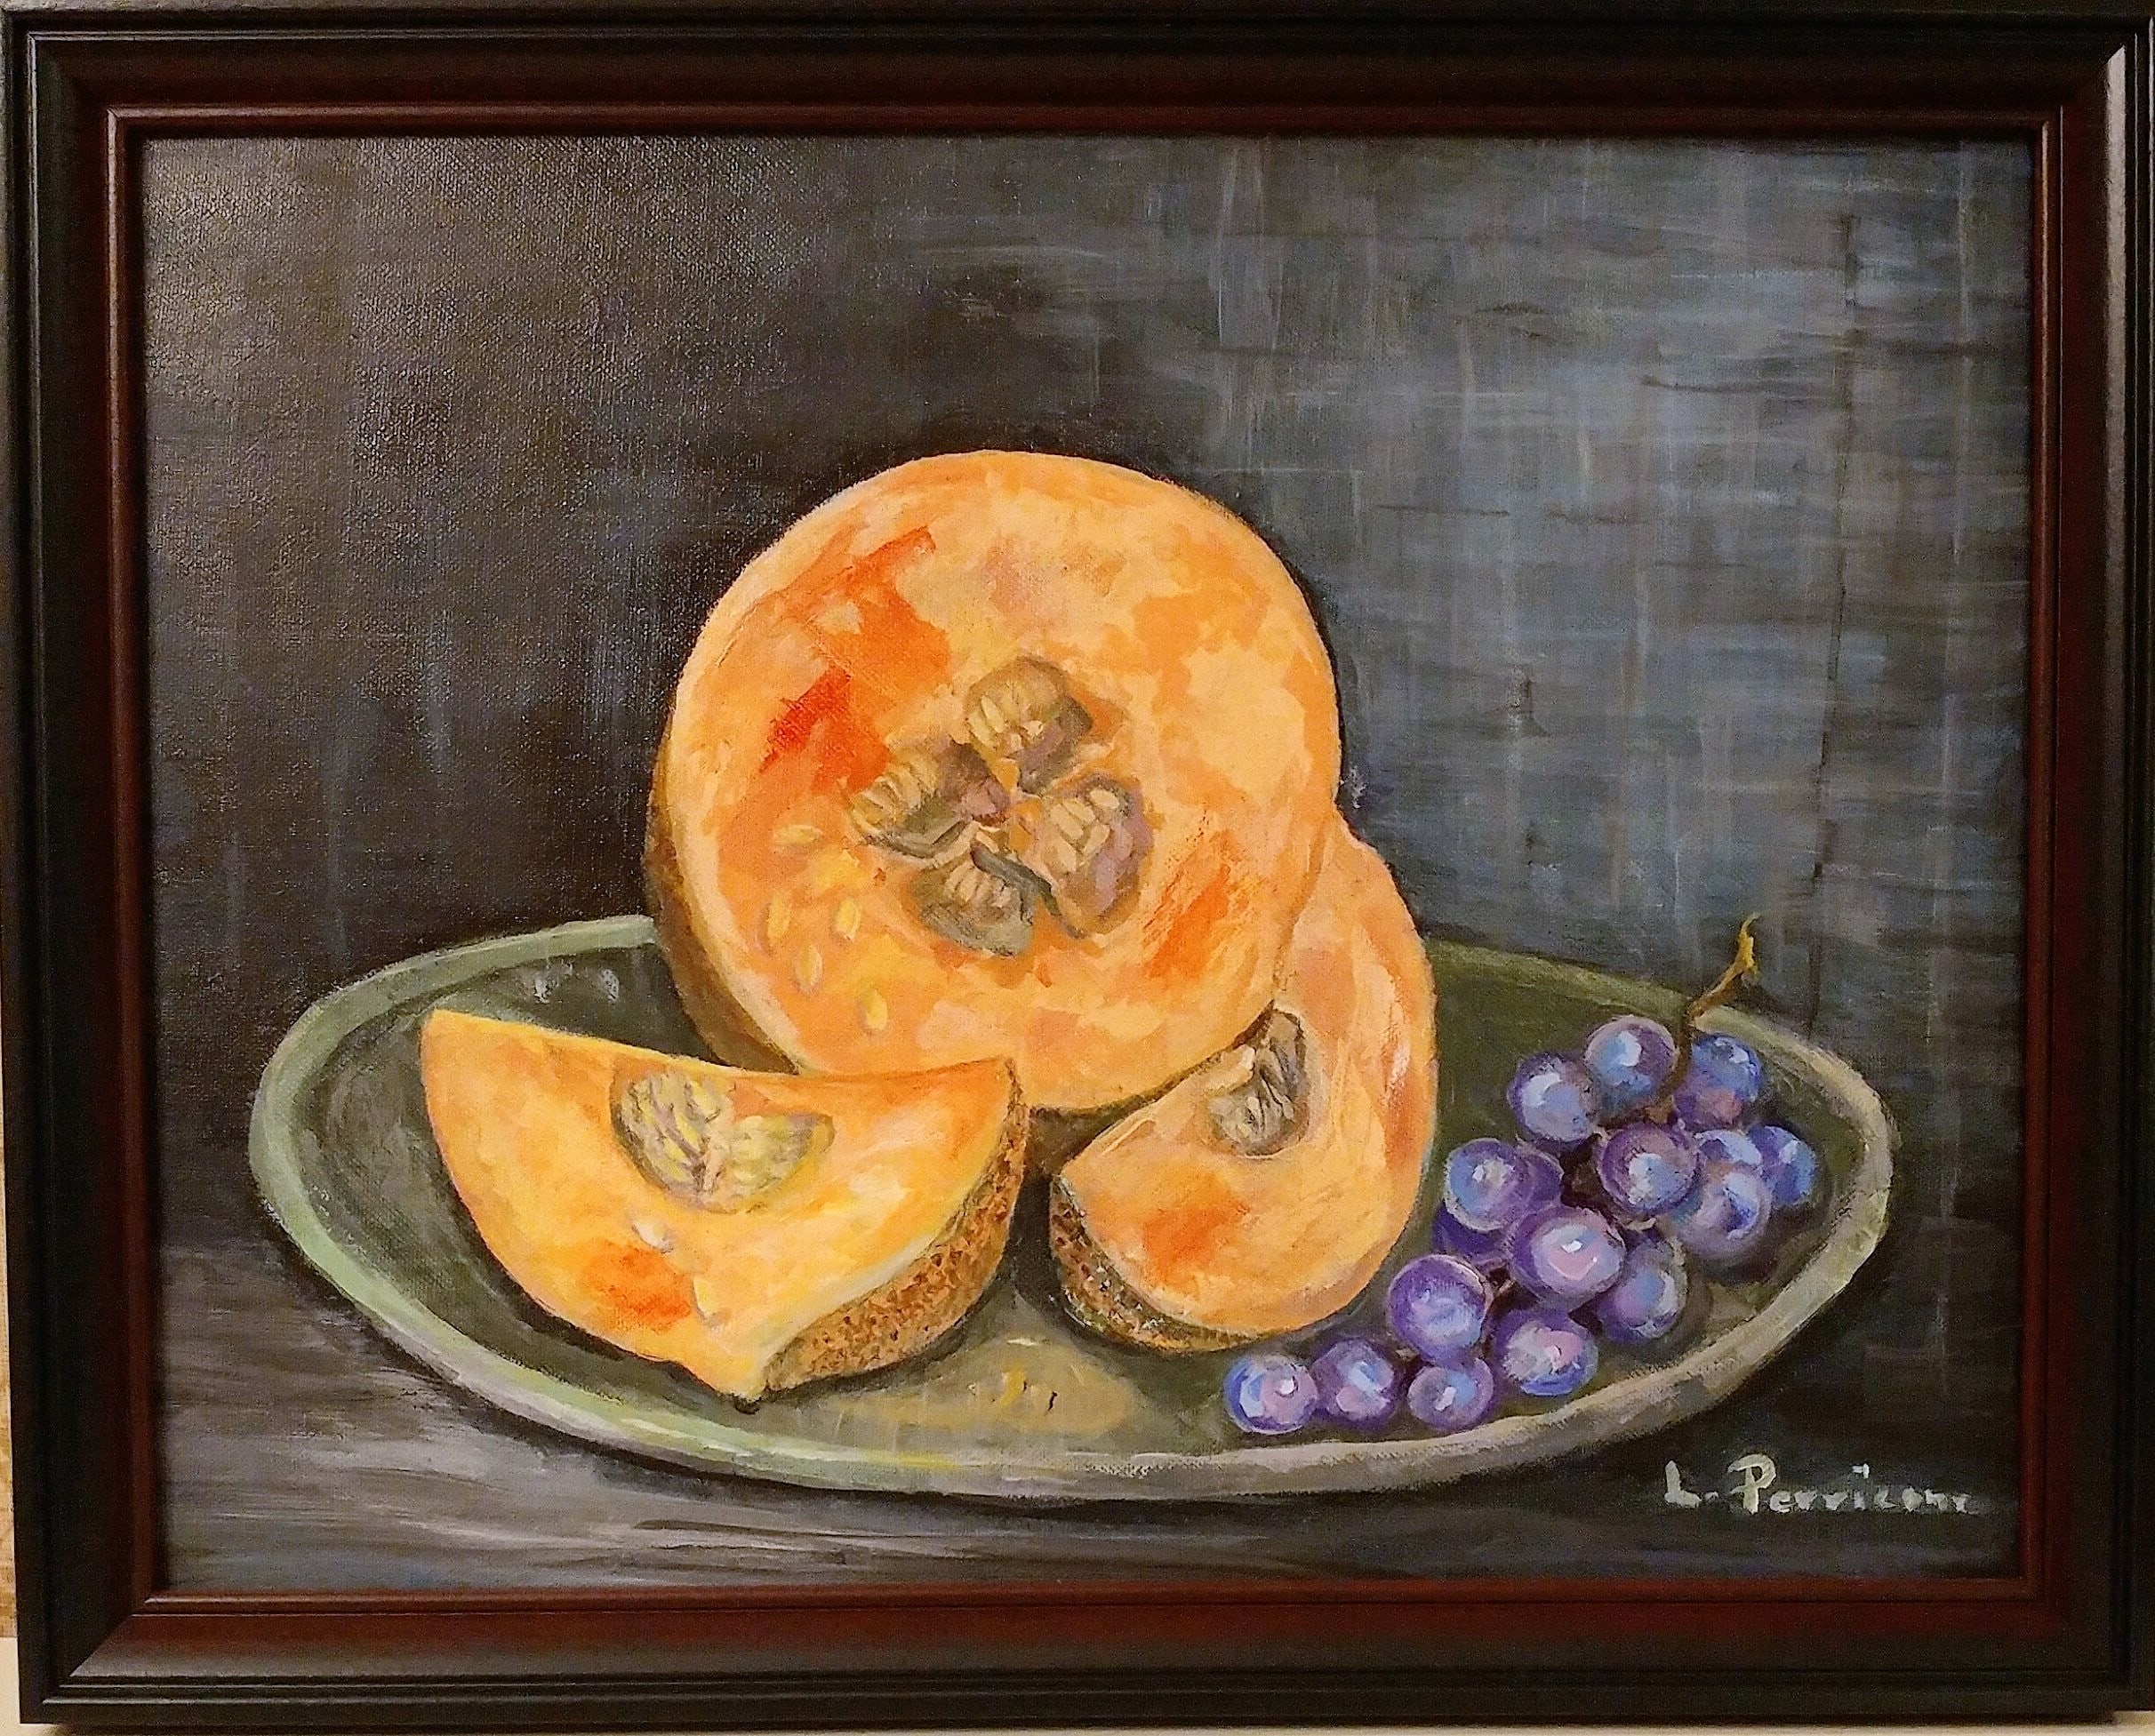 Cantelope and Grapes